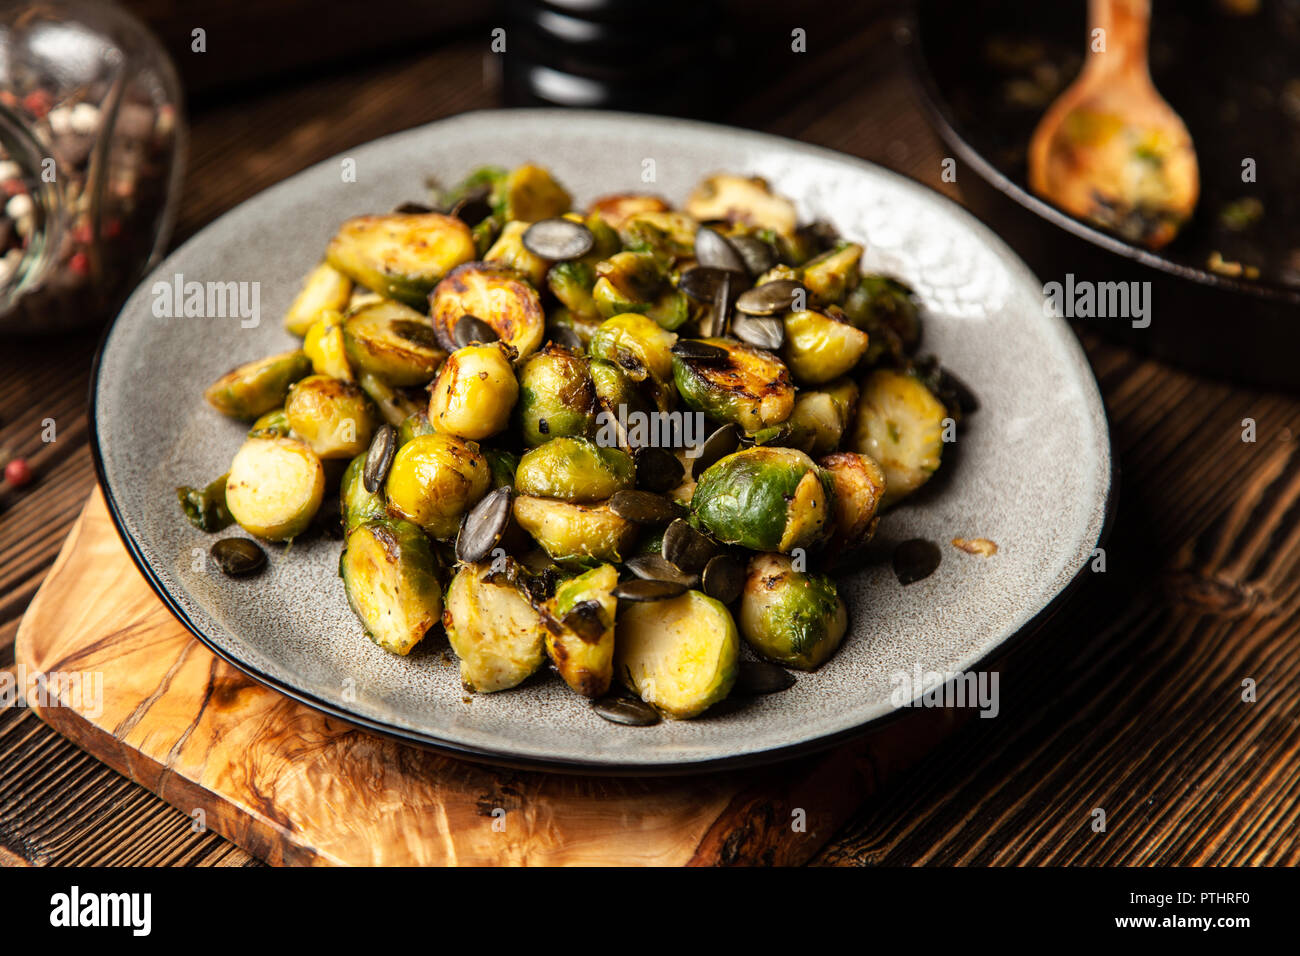 Roasted brussles sprouts Stock Photo